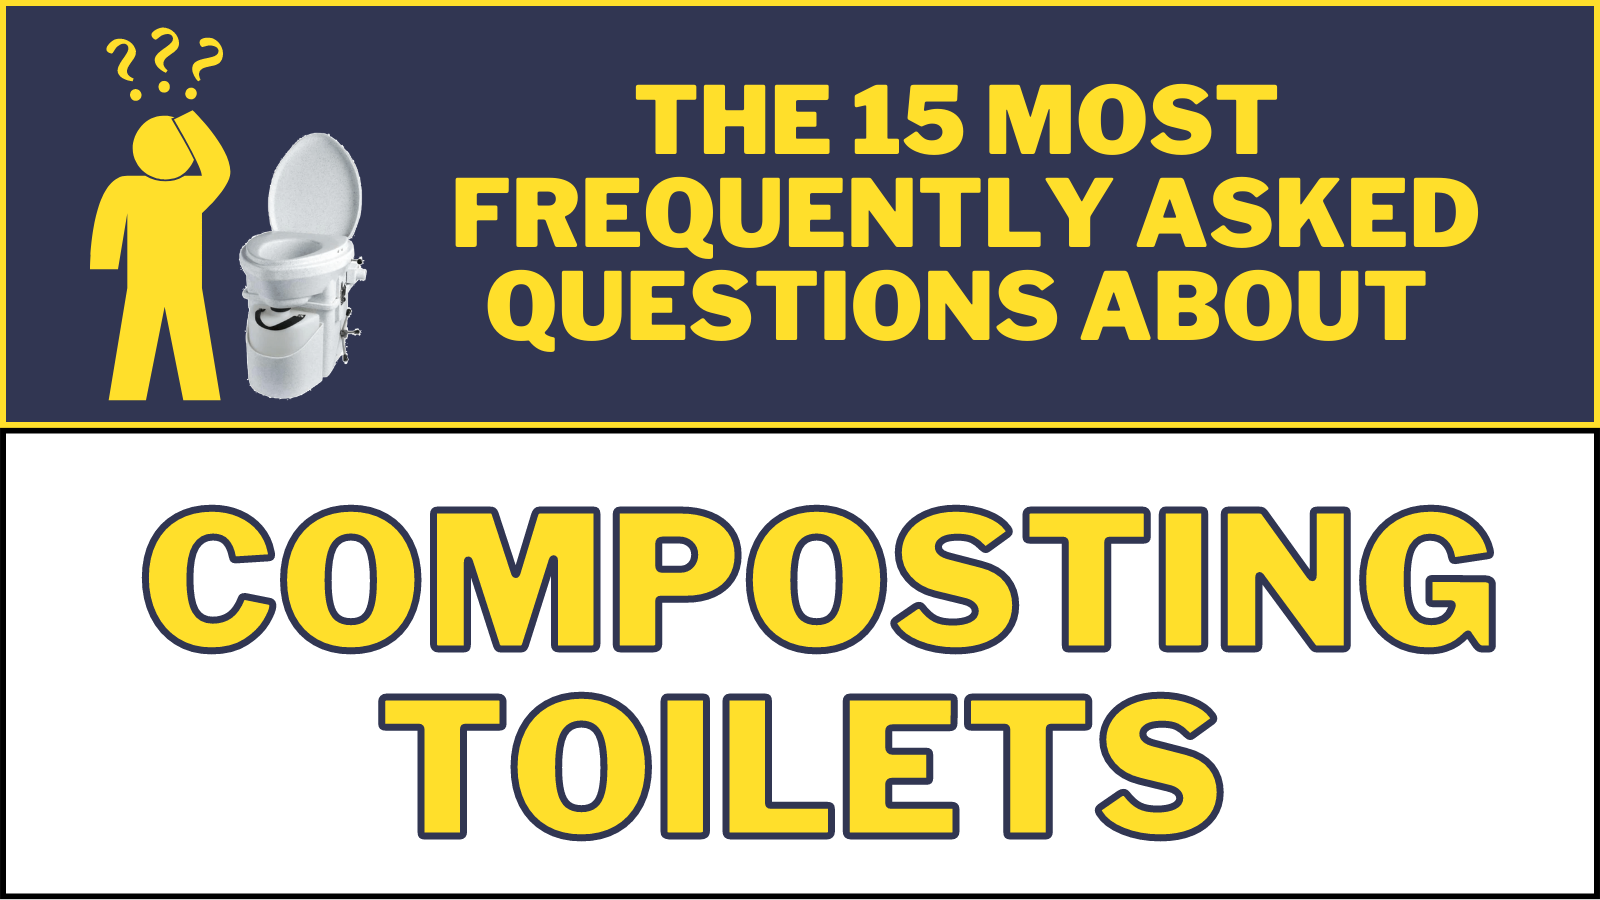 15 Most Frequently Asked Questions About Composting Toilets